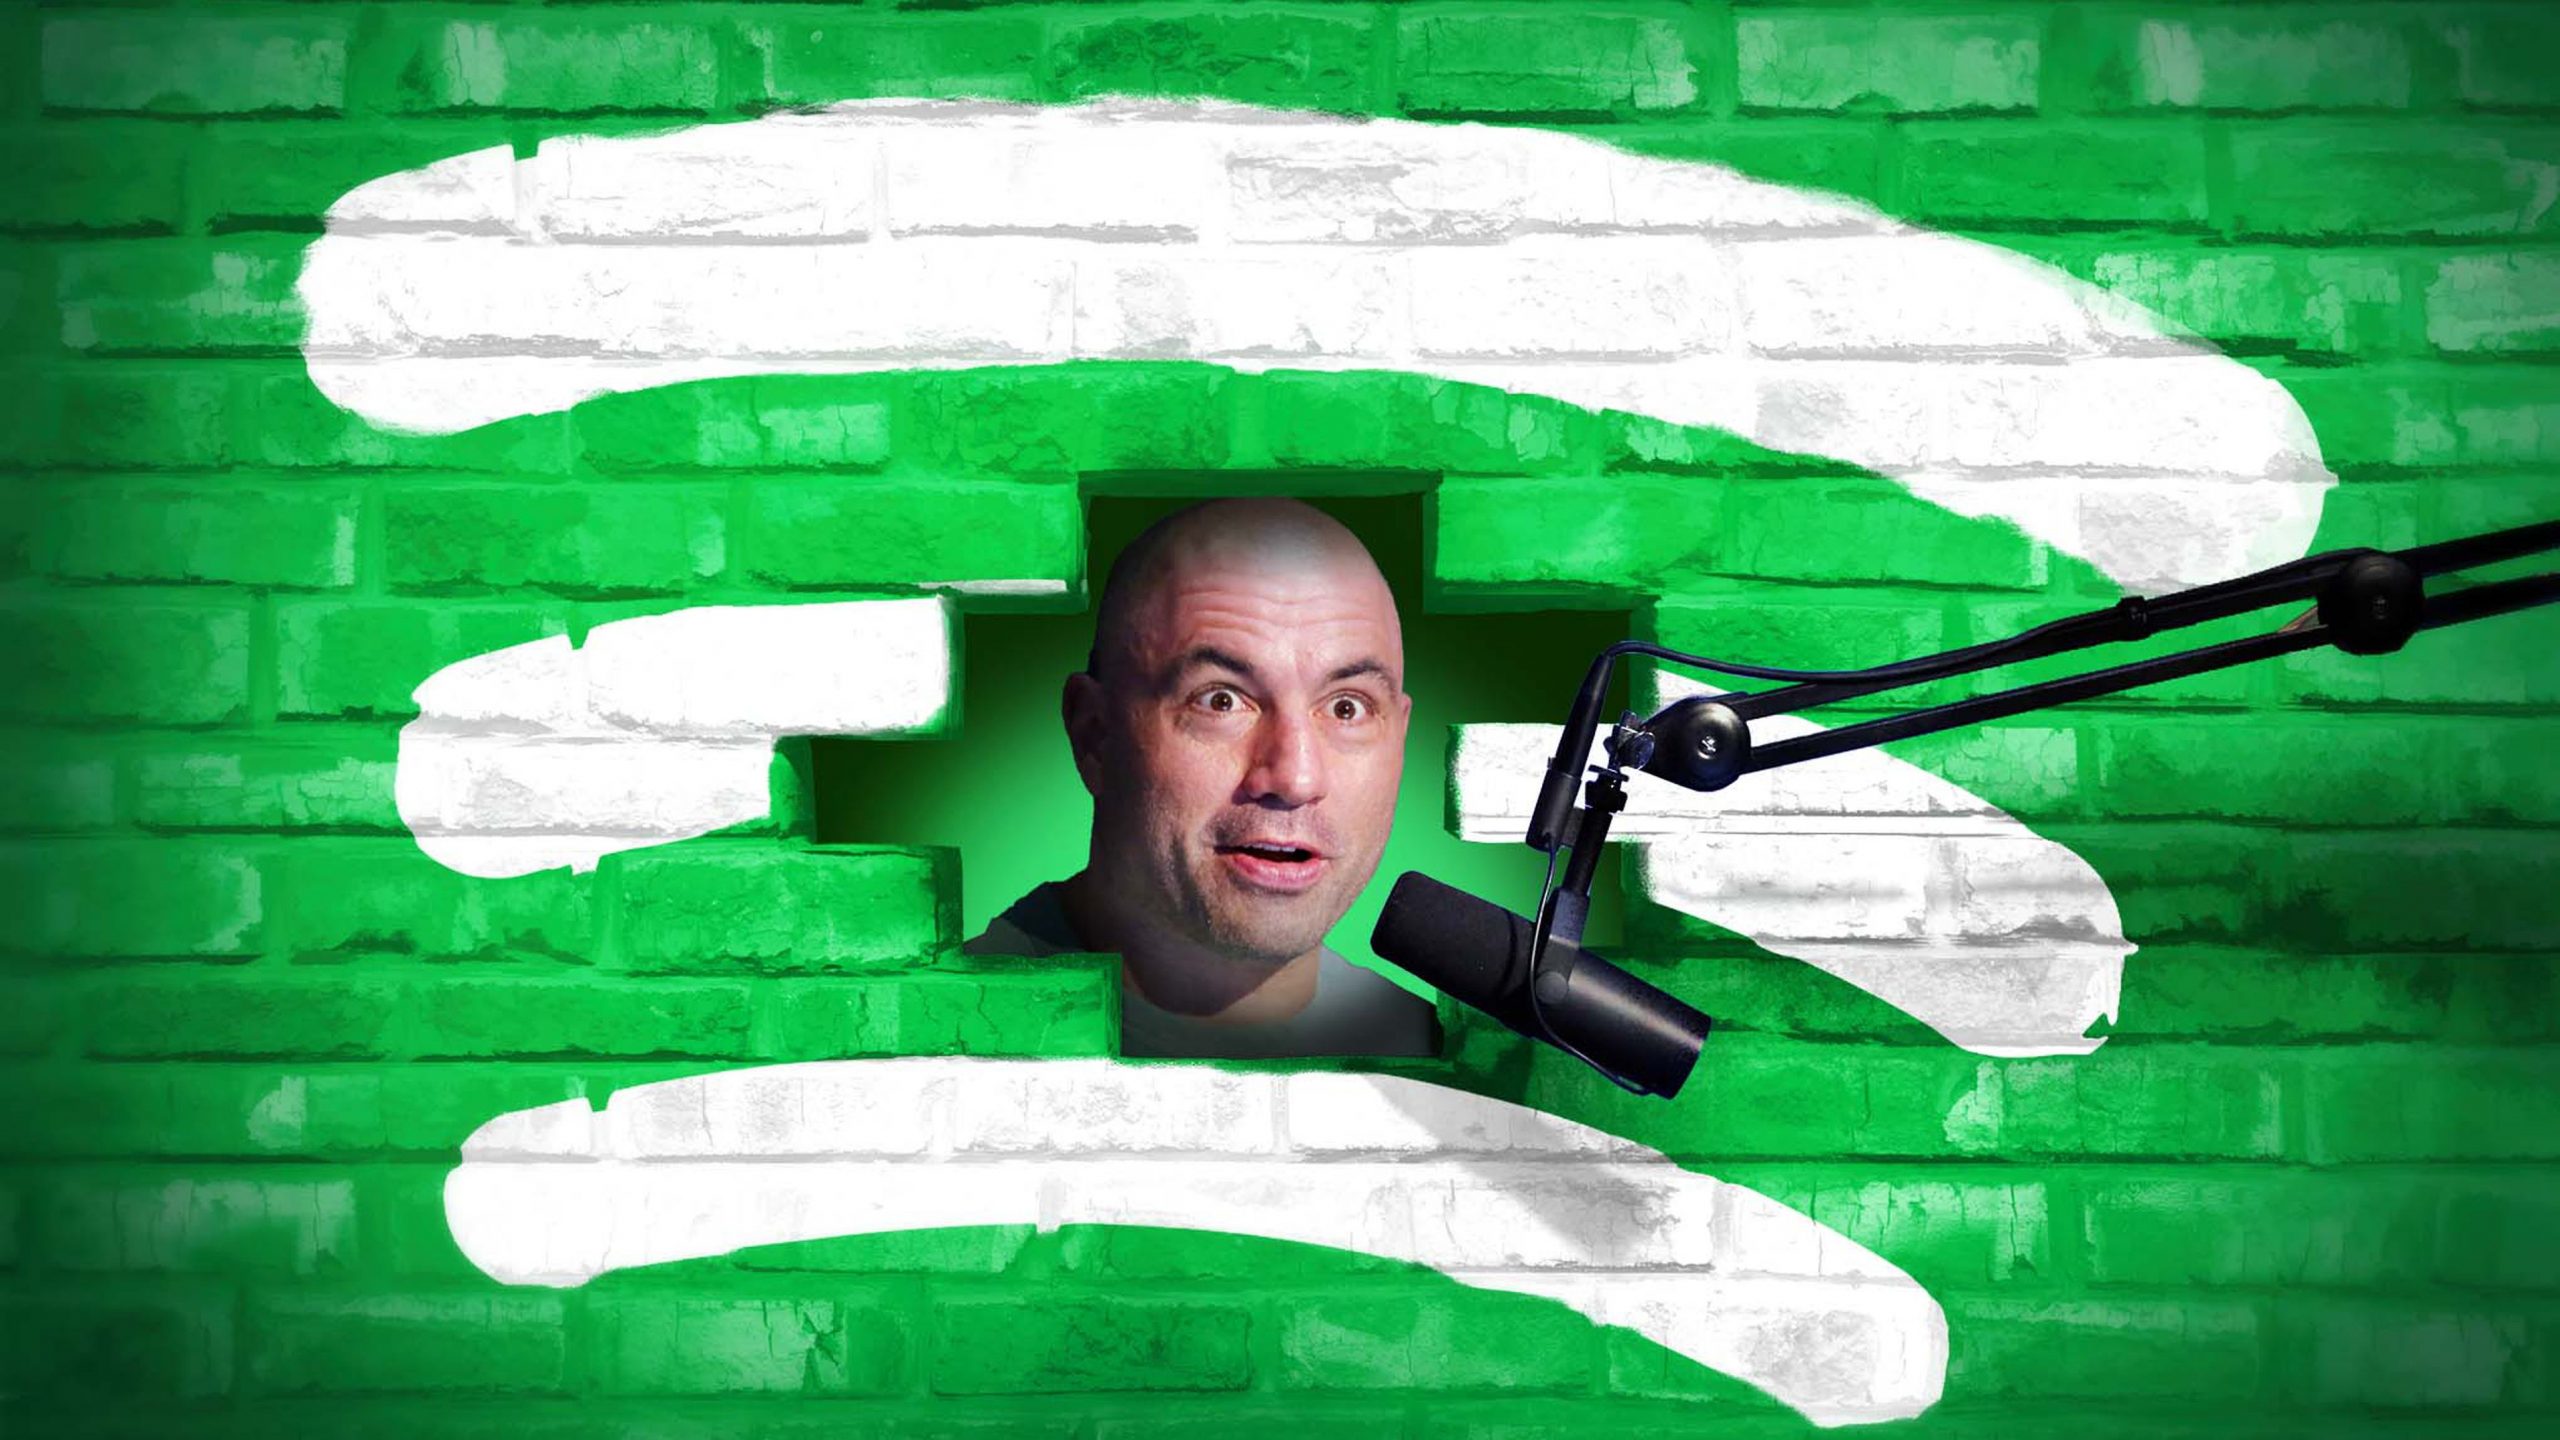 Has Joe Rogan lost influence since moving to Spotify exclusively?